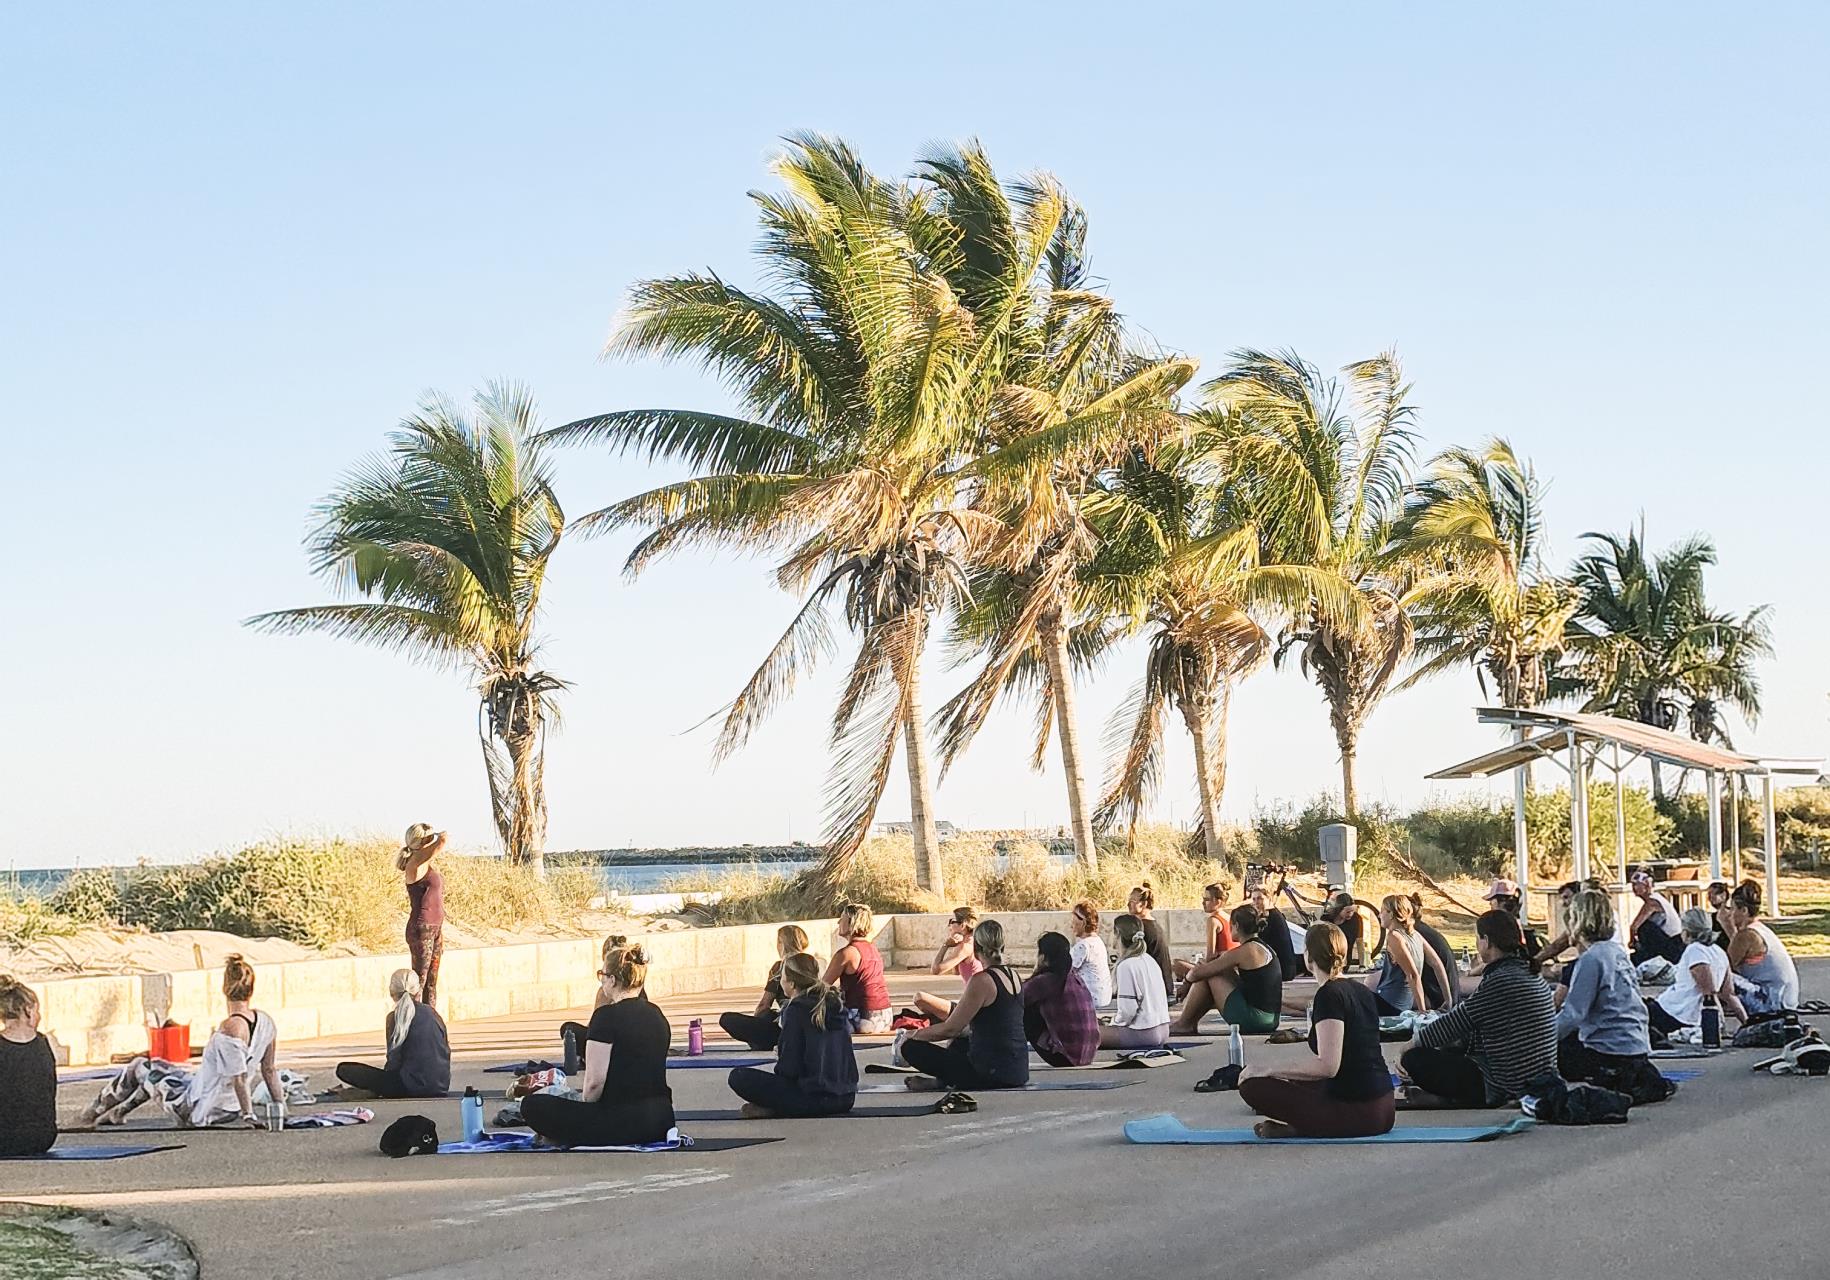 Free Community Yoga is making a difference